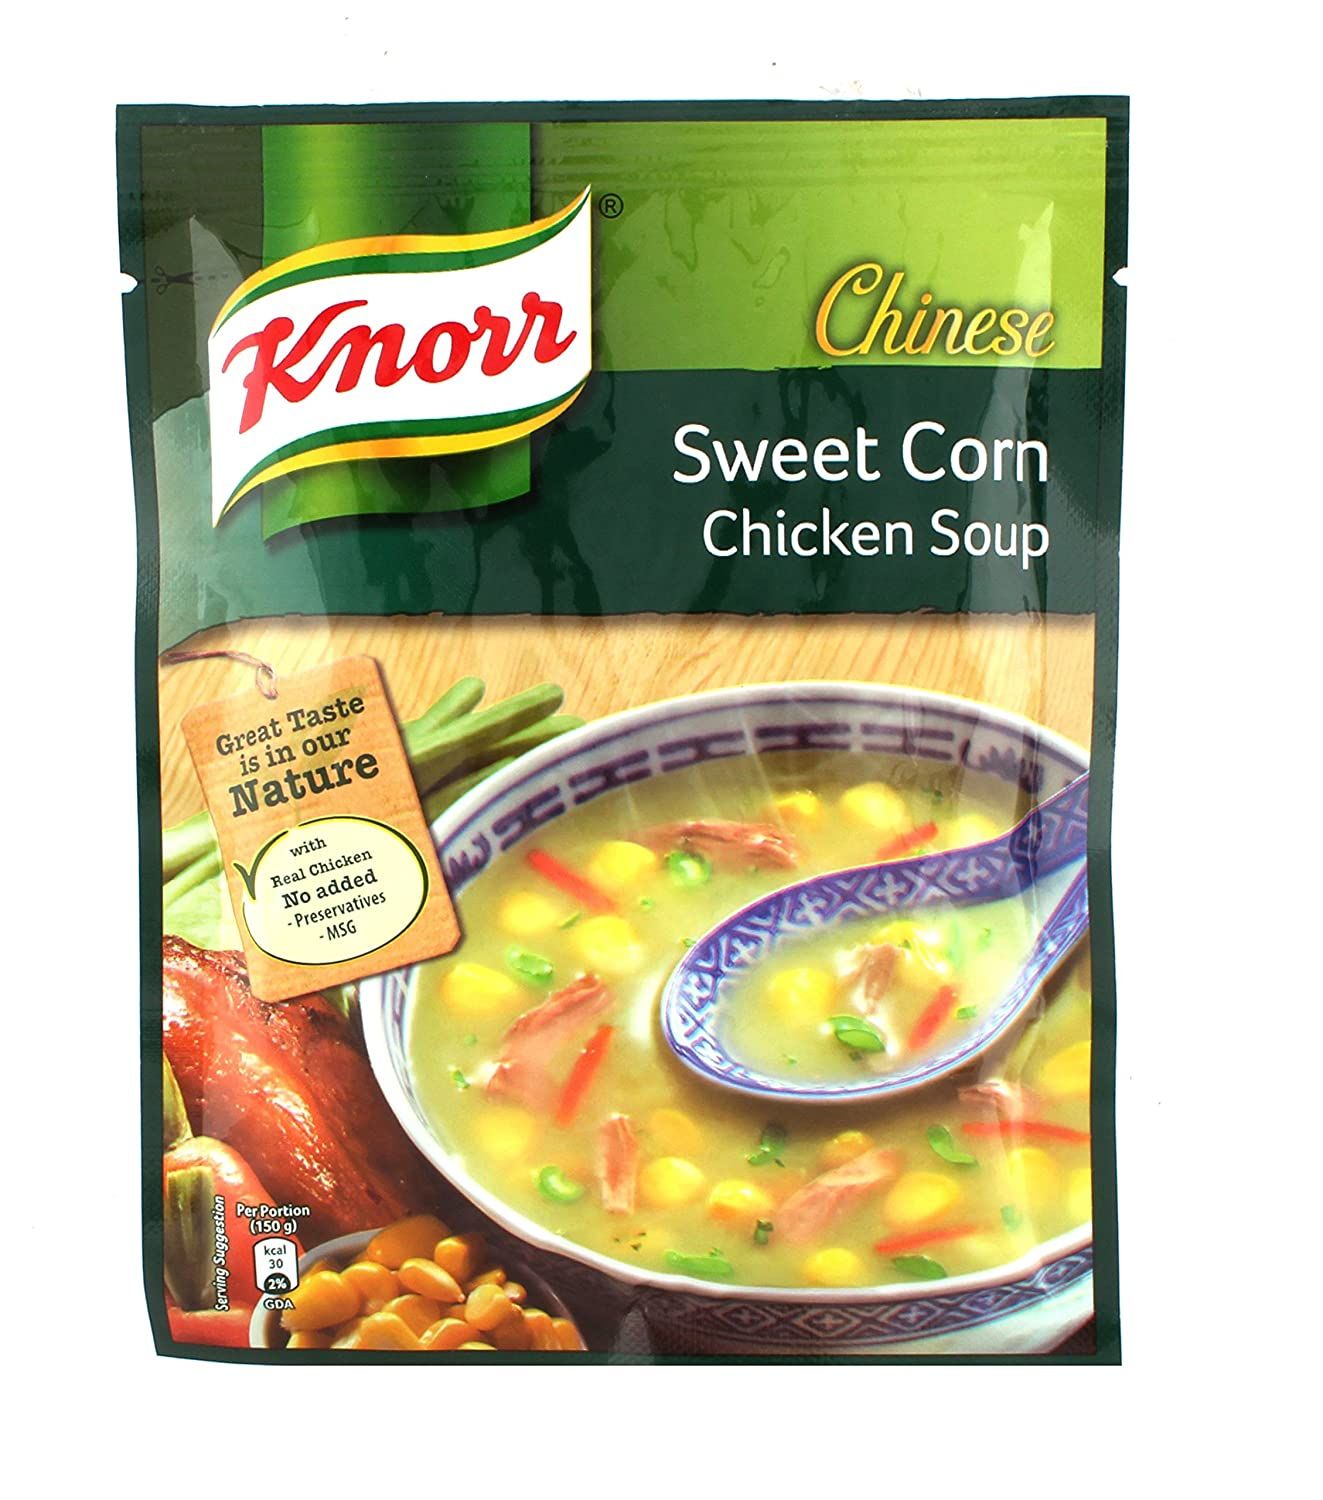 Knorr Sweet Corn Chicken Soup Image